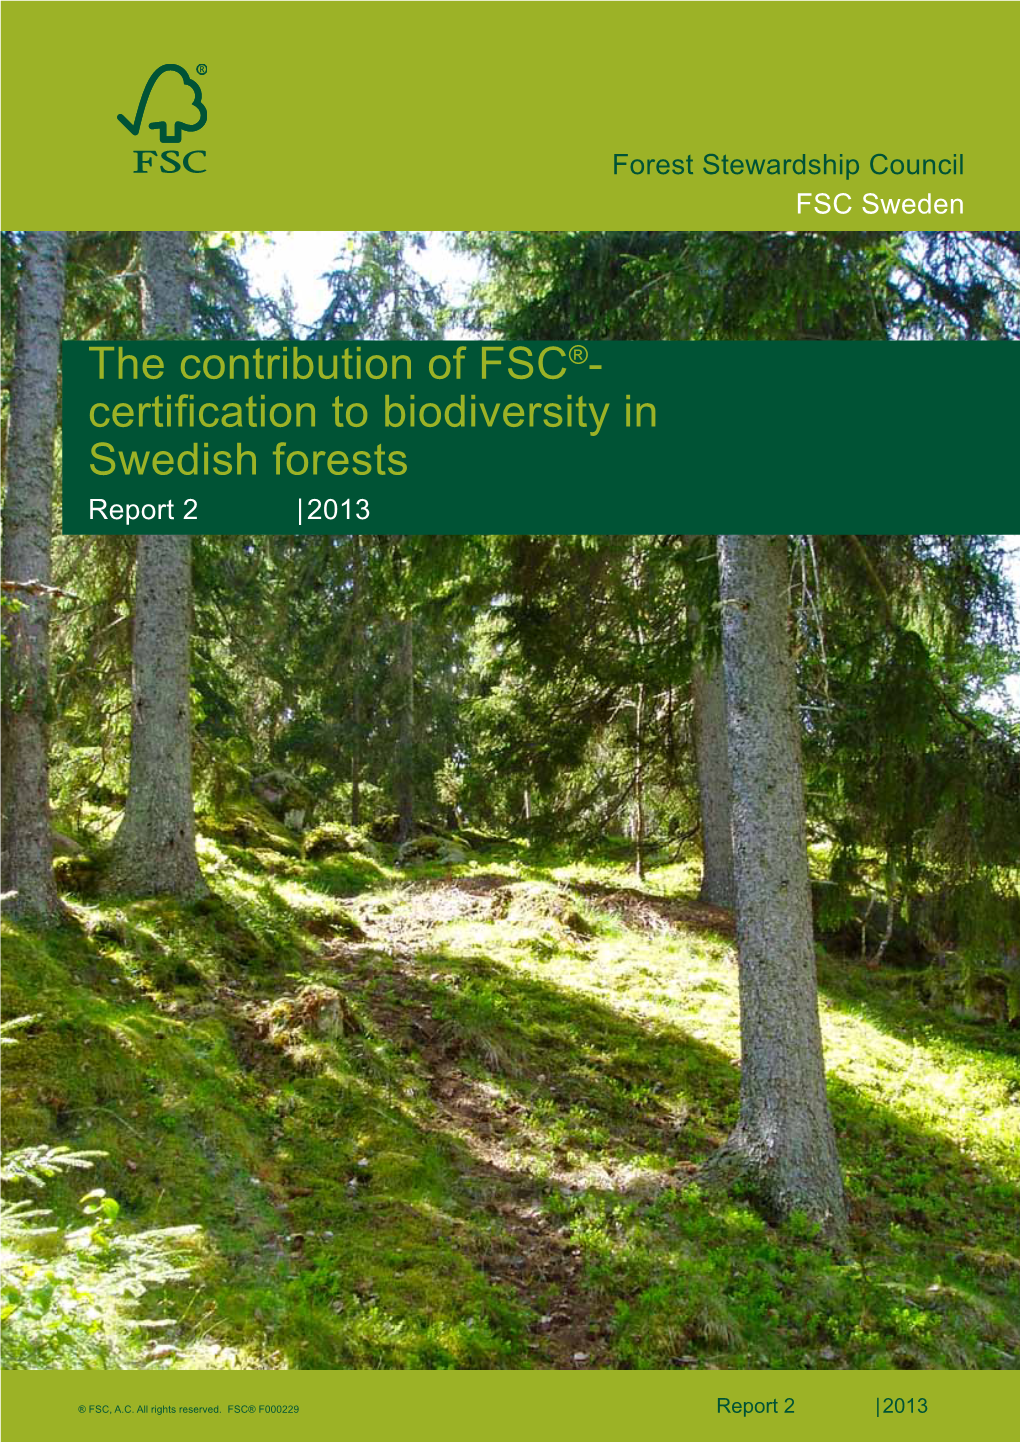 The Contribution of FSC®- Certification to Biodiversity in Swedish Forests Report 2 |2013